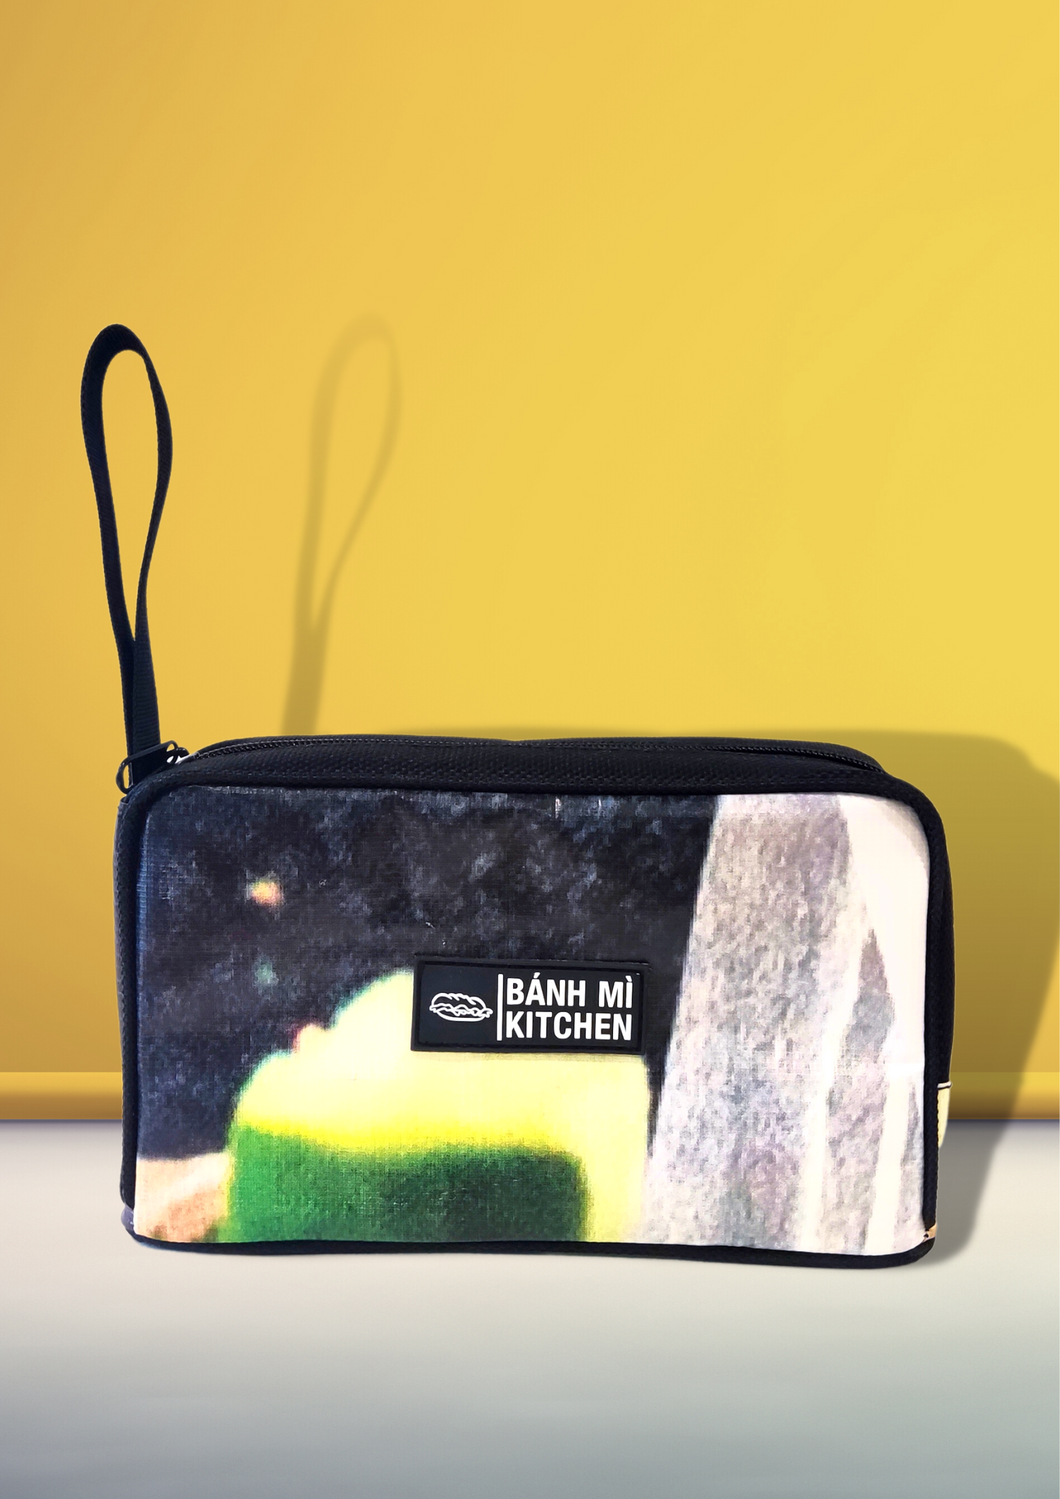 BMKN x Side B Collaboration Upcycled Clutch